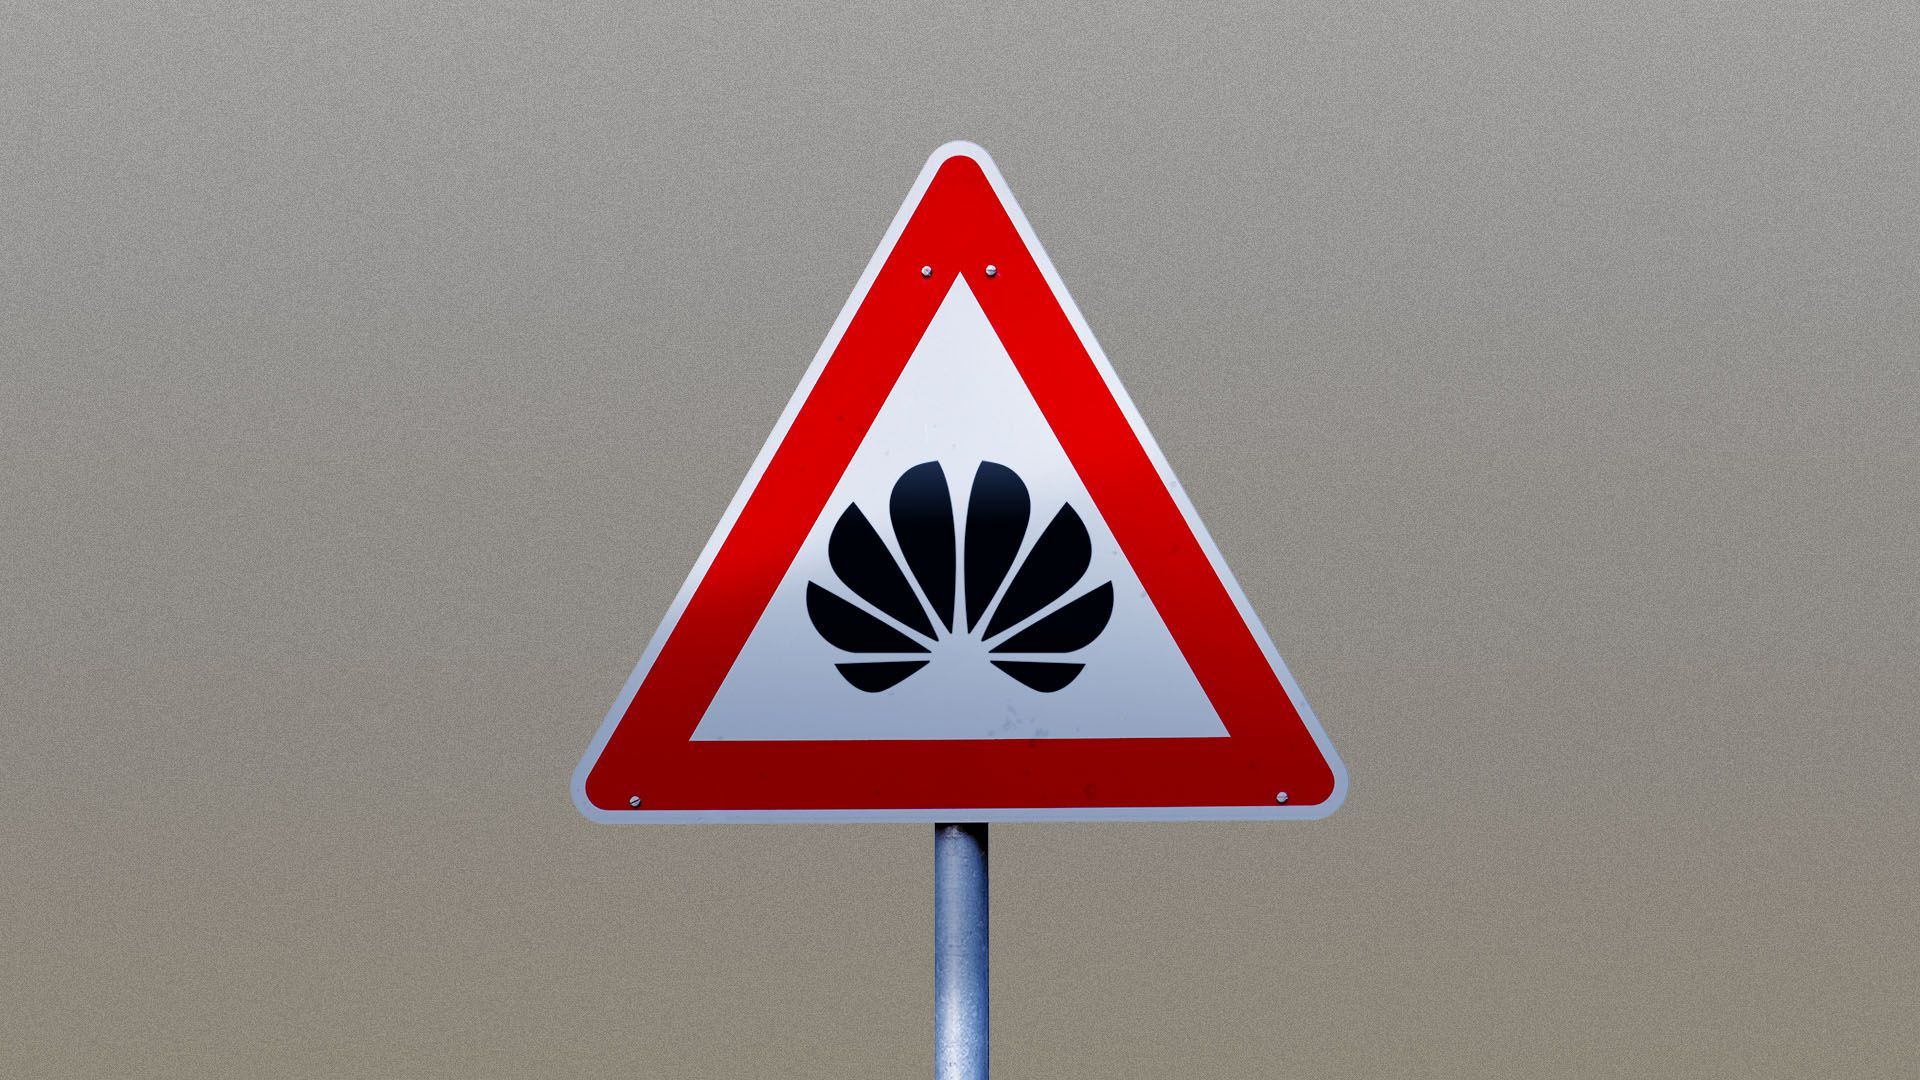 An illustration of a yield sign with the Huawei logo in it